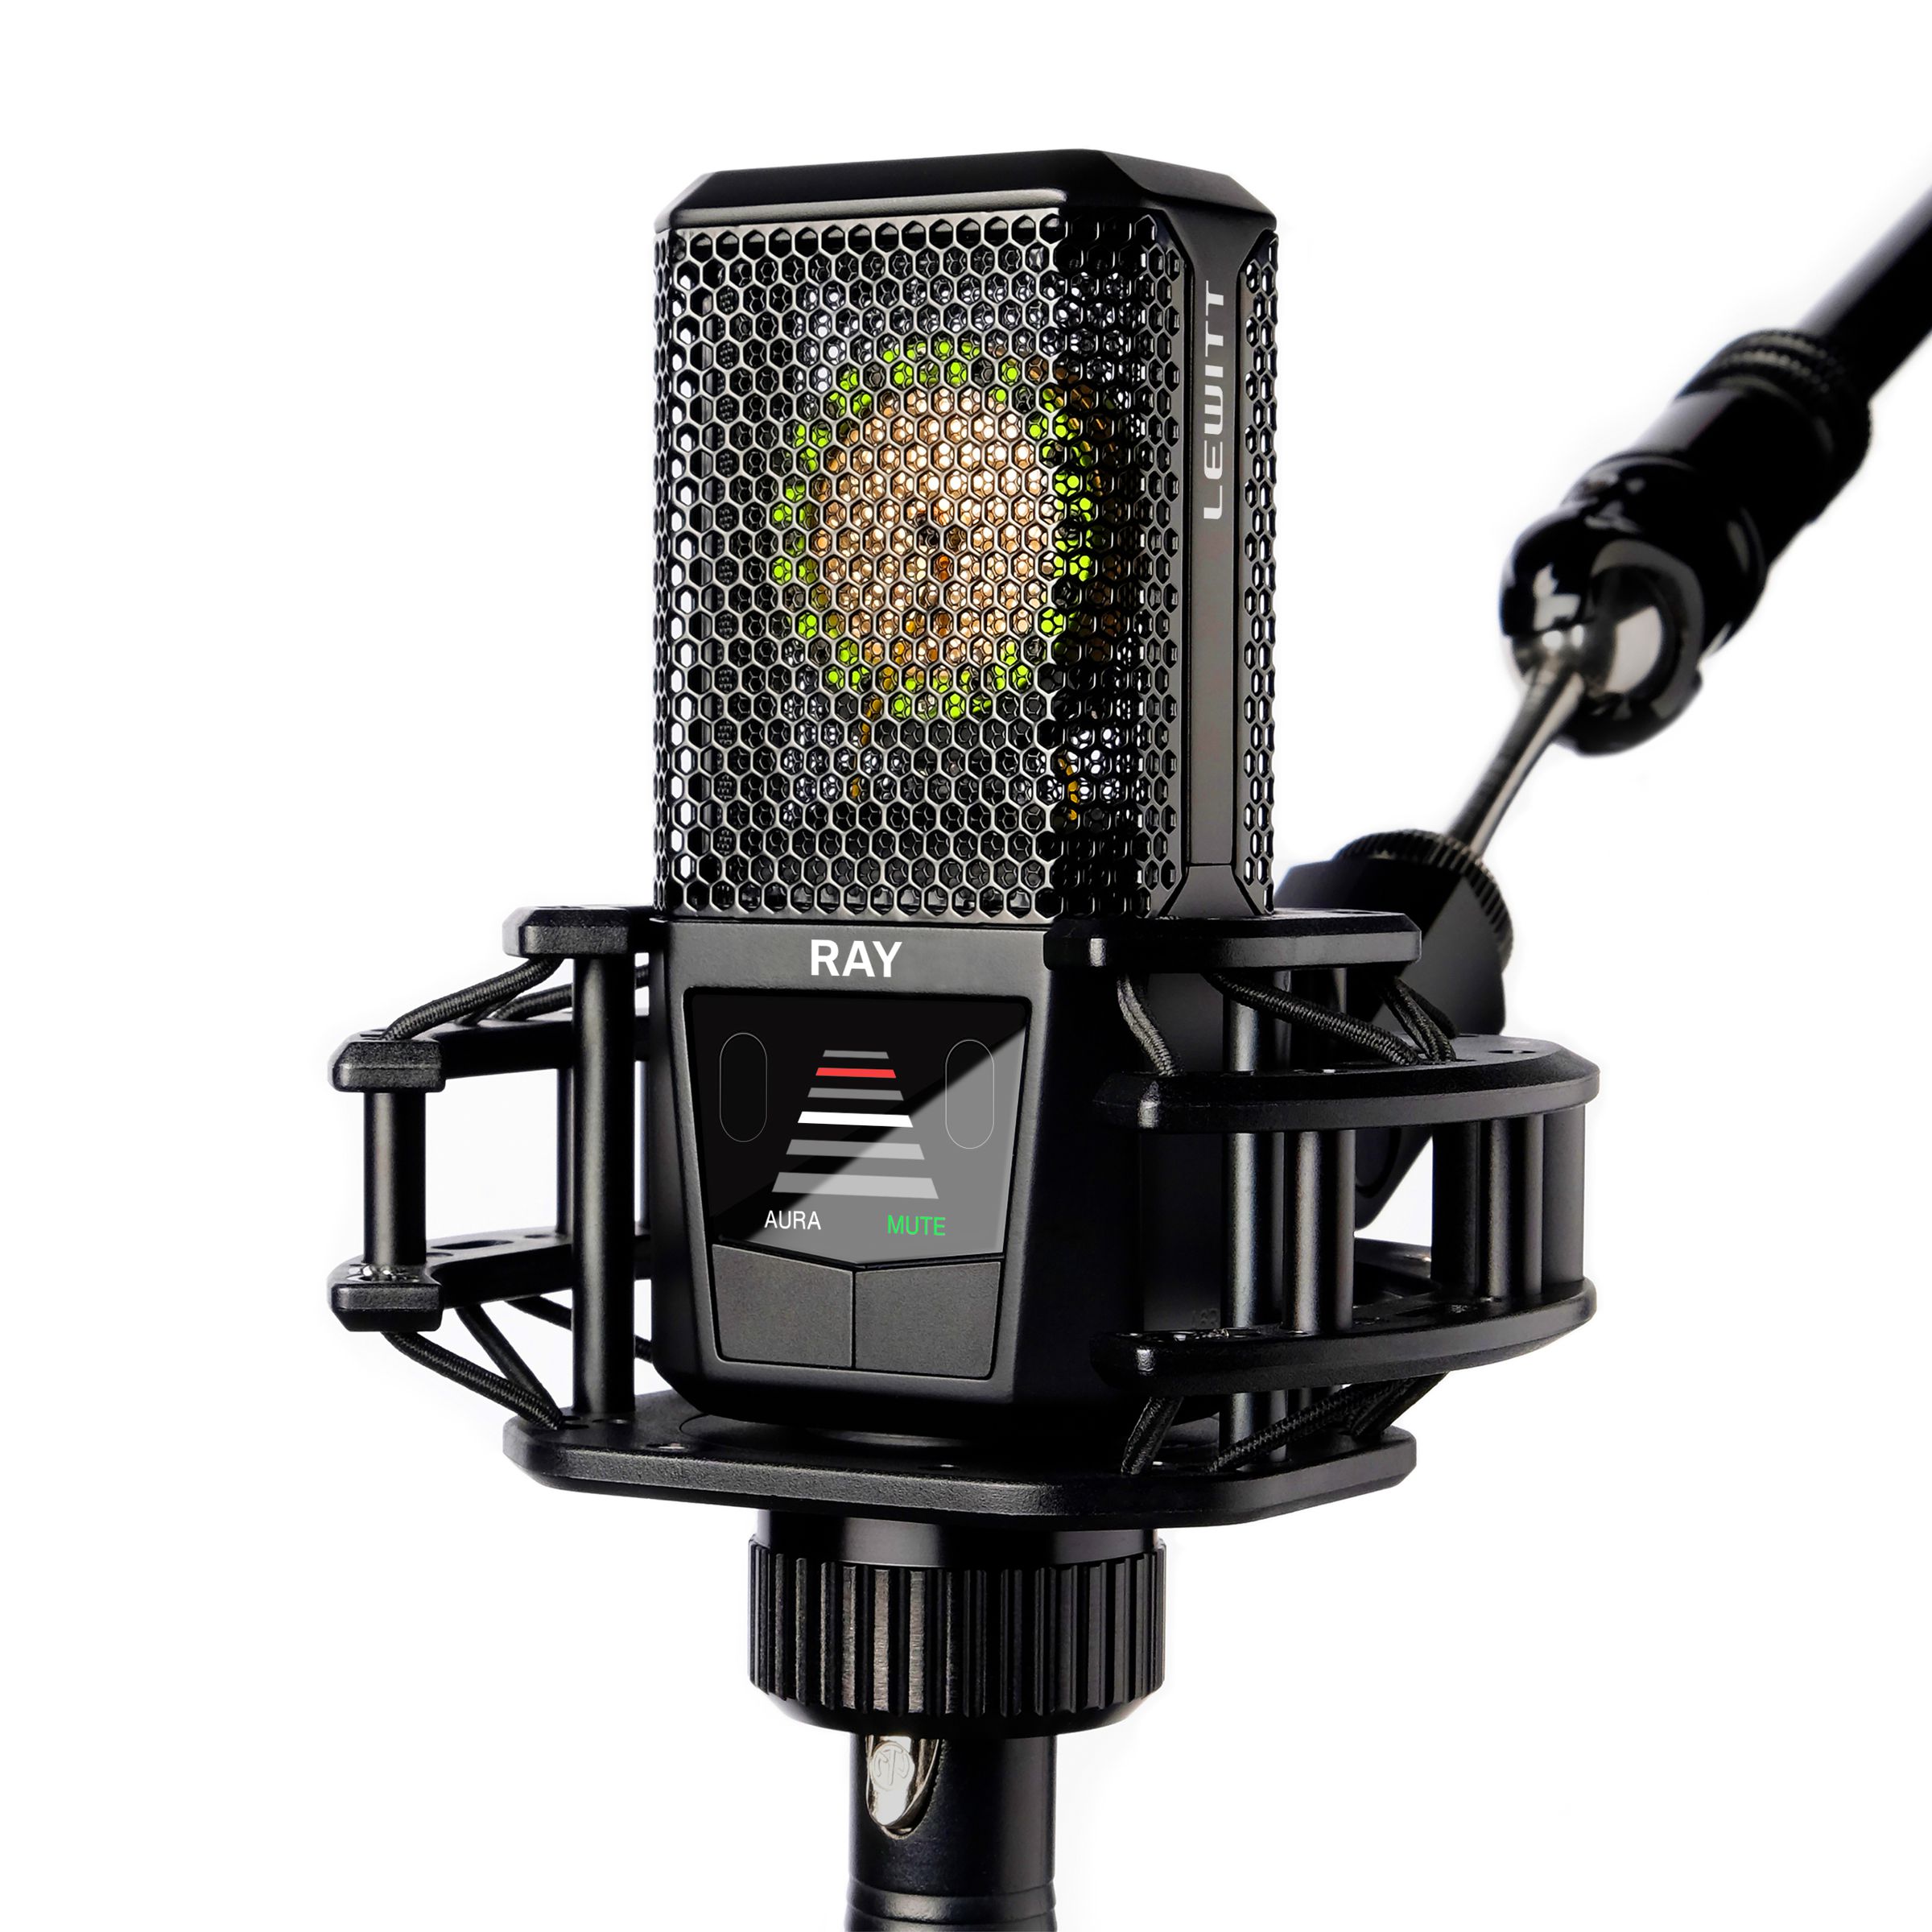 Front of the Ray — a meter showing how far away you are from the microphone.